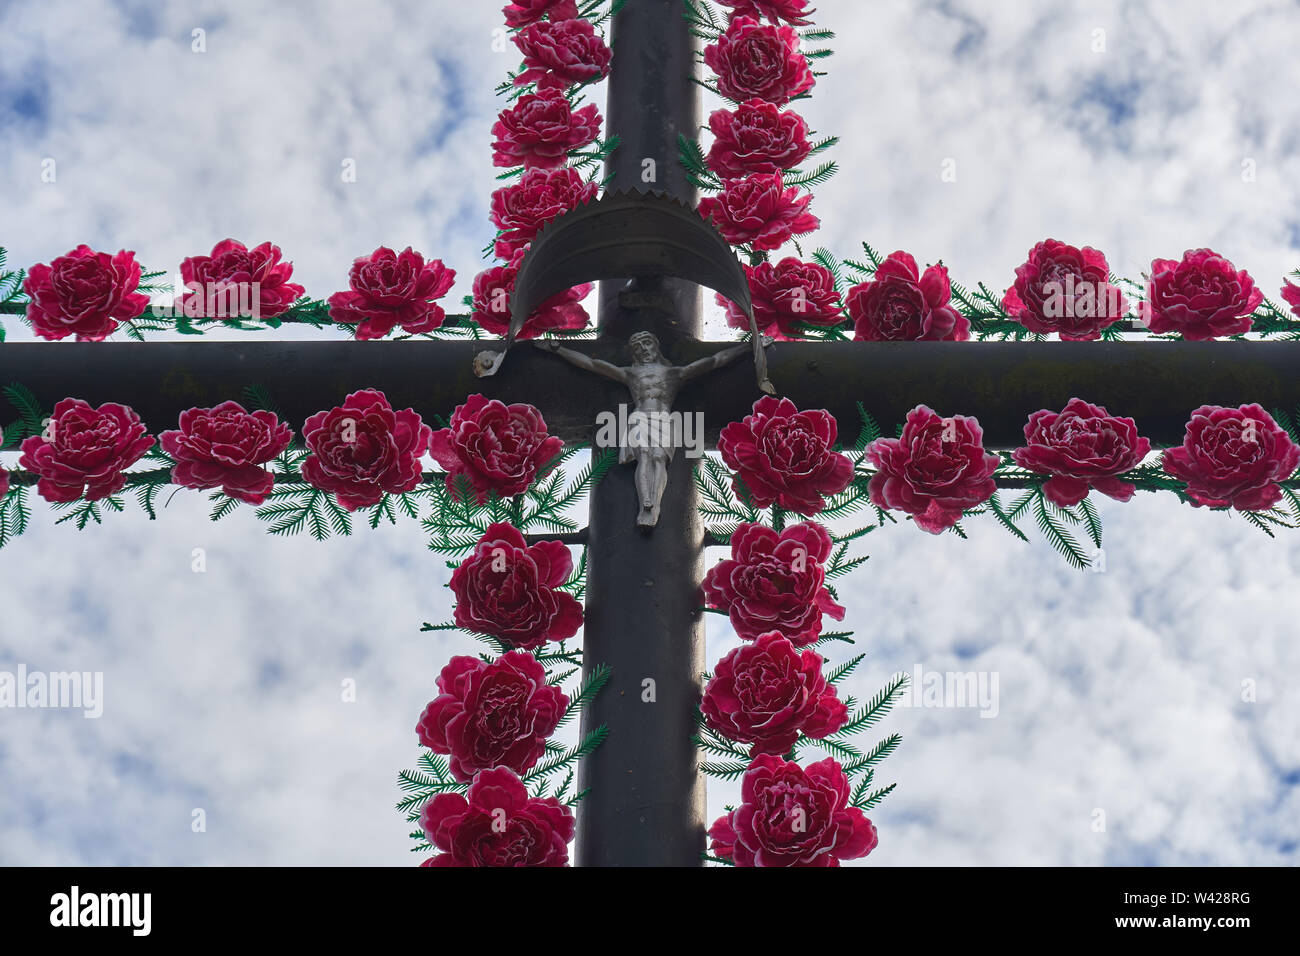 Traditional Catholic cachapel near the road in the shape of a cross with plastic artificial flowers, Biale, Poland Stock Photo